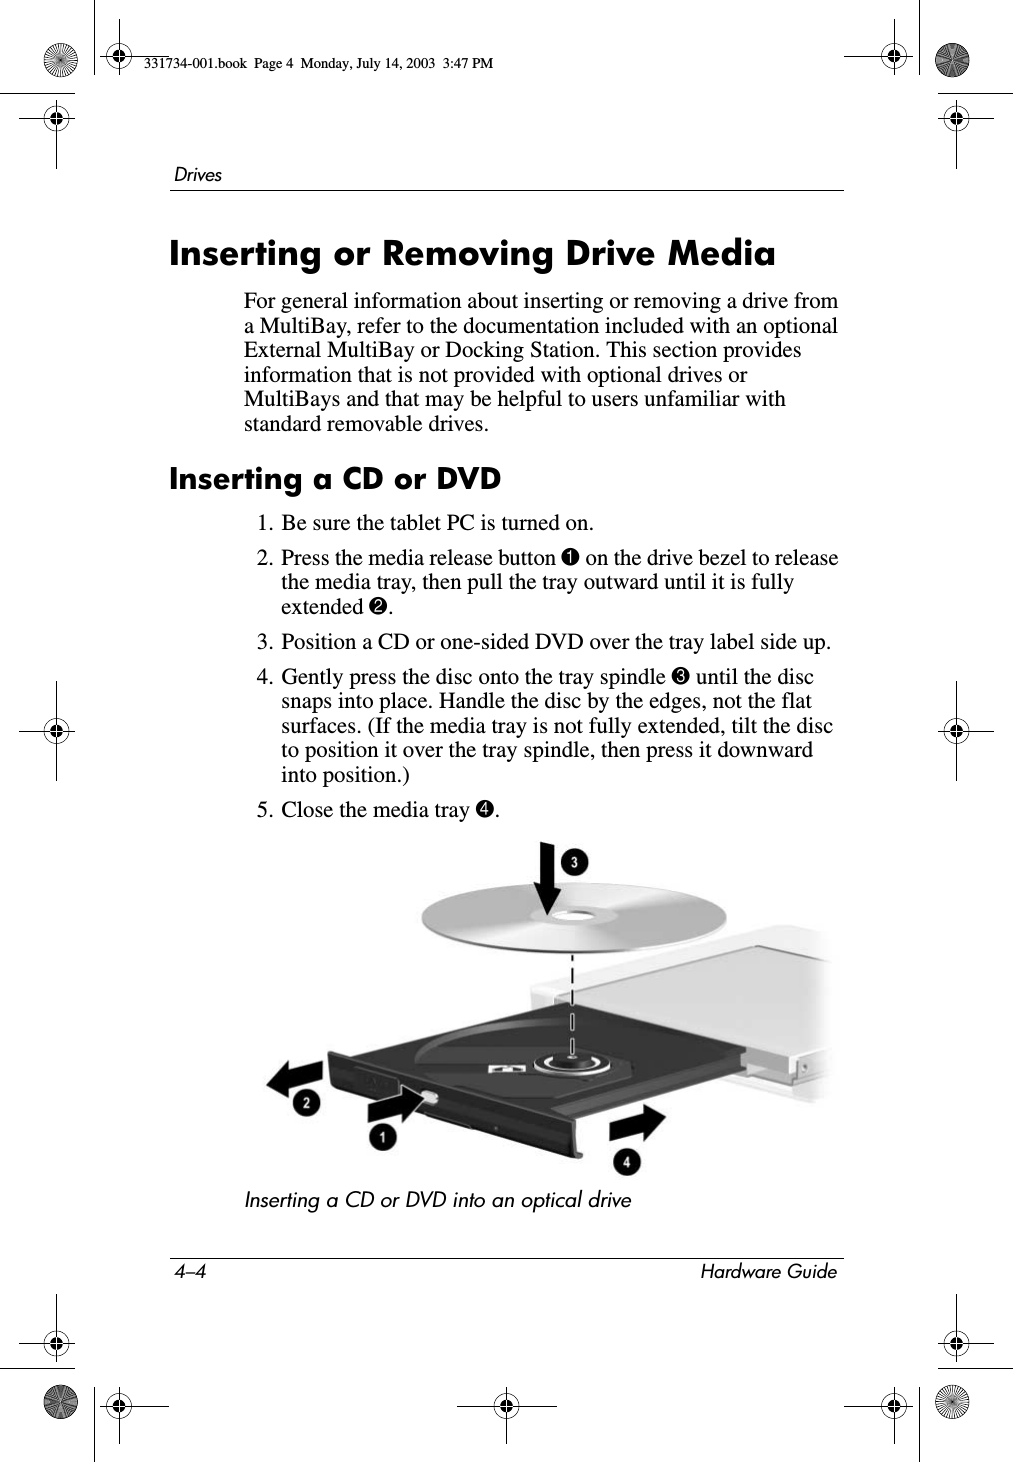 4–4 Hardware GuideDrivesInserting or Removing Drive MediaFor general information about inserting or removing a drive from a MultiBay, refer to the documentation included with an optional External MultiBay or Docking Station. This section provides information that is not provided with optional drives or MultiBays and that may be helpful to users unfamiliar with standard removable drives.Inserting a CD or DVD1. Be sure the tablet PC is turned on.2. Press the media release button 1 on the drive bezel to release the media tray, then pull the tray outward until it is fully extended 2.3. Position a CD or one-sided DVD over the tray label side up.4. Gently press the disc onto the tray spindle 3 until the disc snaps into place. Handle the disc by the edges, not the flat surfaces. (If the media tray is not fully extended, tilt the disc to position it over the tray spindle, then press it downward into position.)5. Close the media tray 4.Inserting a CD or DVD into an optical drive331734-001.book  Page 4  Monday, July 14, 2003  3:47 PM